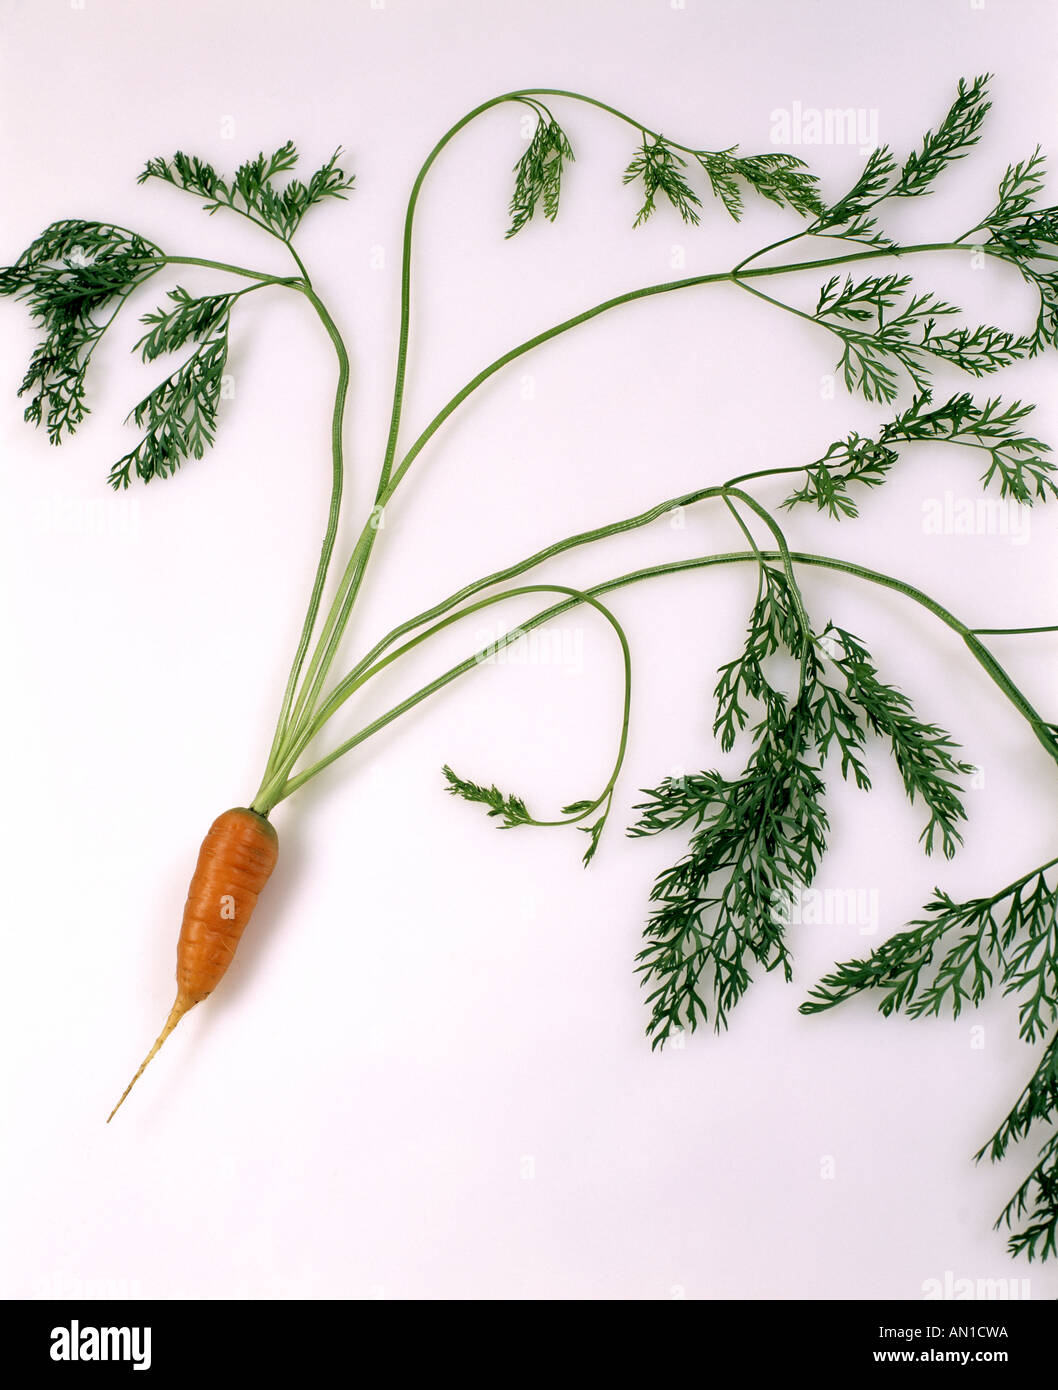 CARROT DAUCUS CAROTA RED CORED CHANTENAY MATURE CARROT SHOWS ROOT STEM AND LEAVES MATURES IN 70 DAYS ORGANICALLY GROWN STUDIO GA Stock Photo